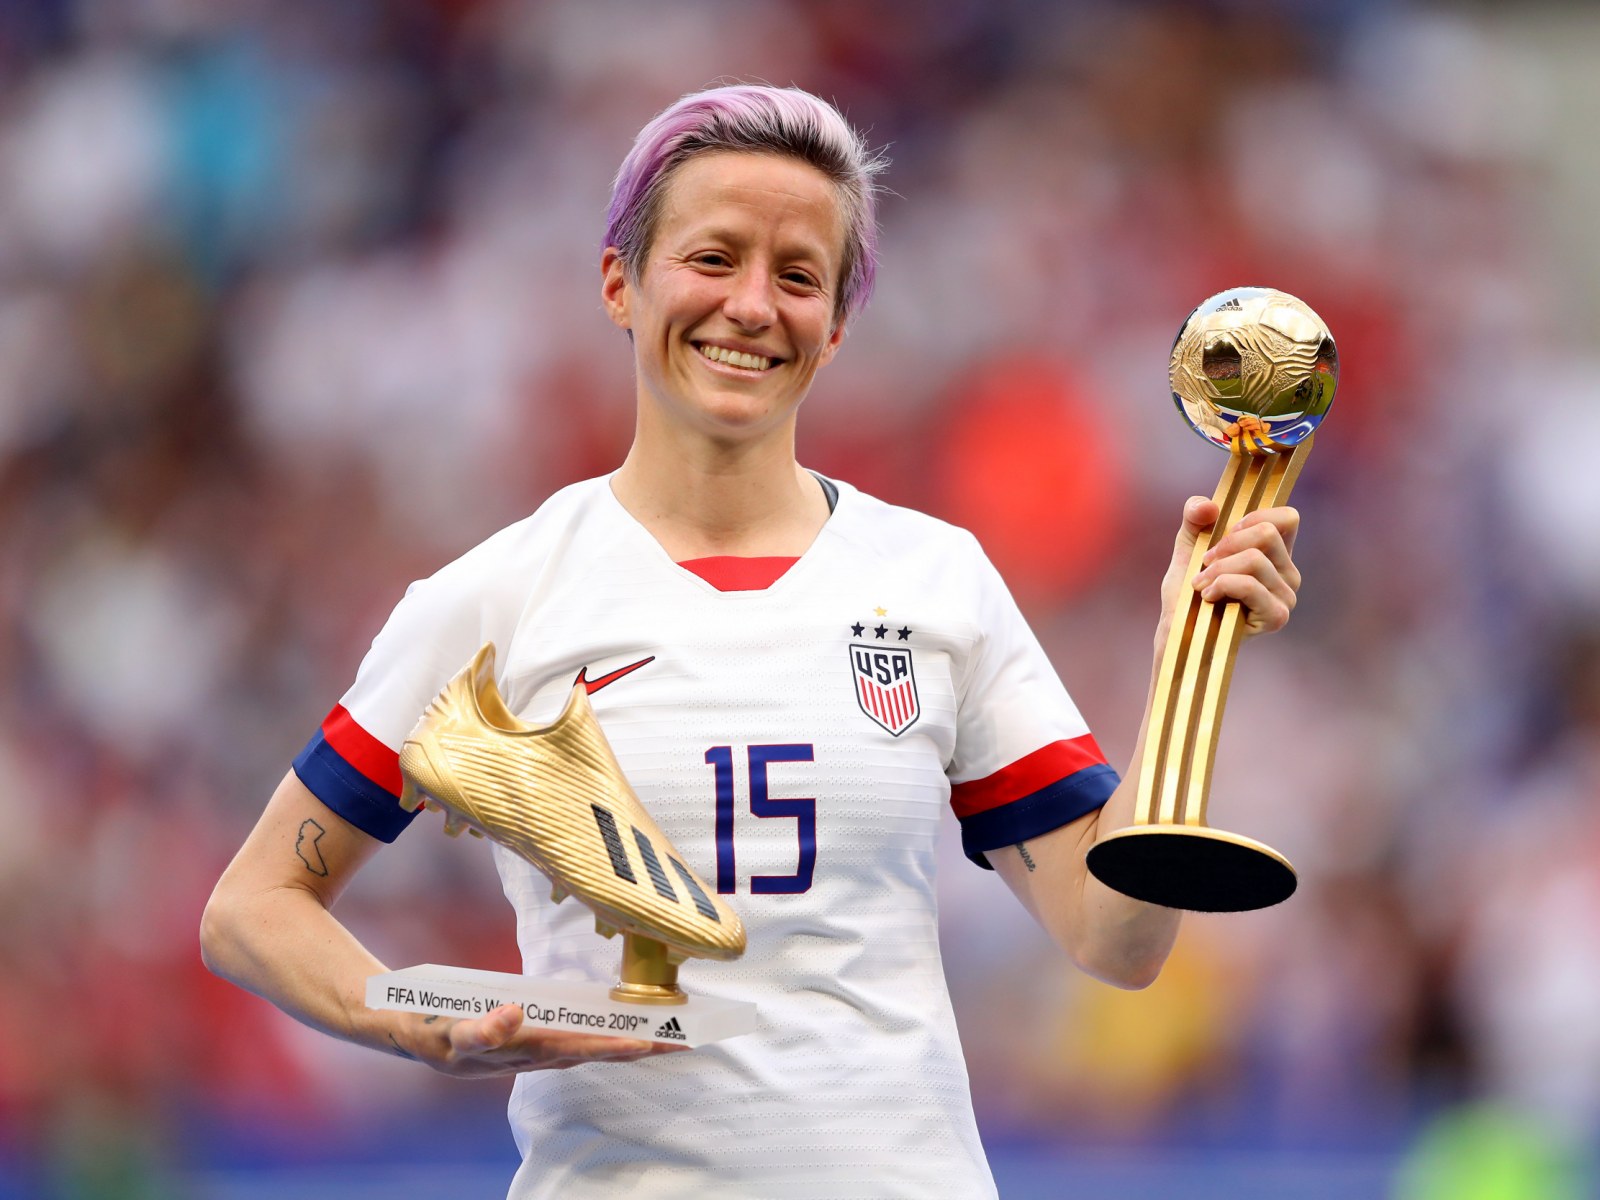 Which team did Megan Rapinoe play for in the National Women's Soccer League (NWSL) inaugural season?